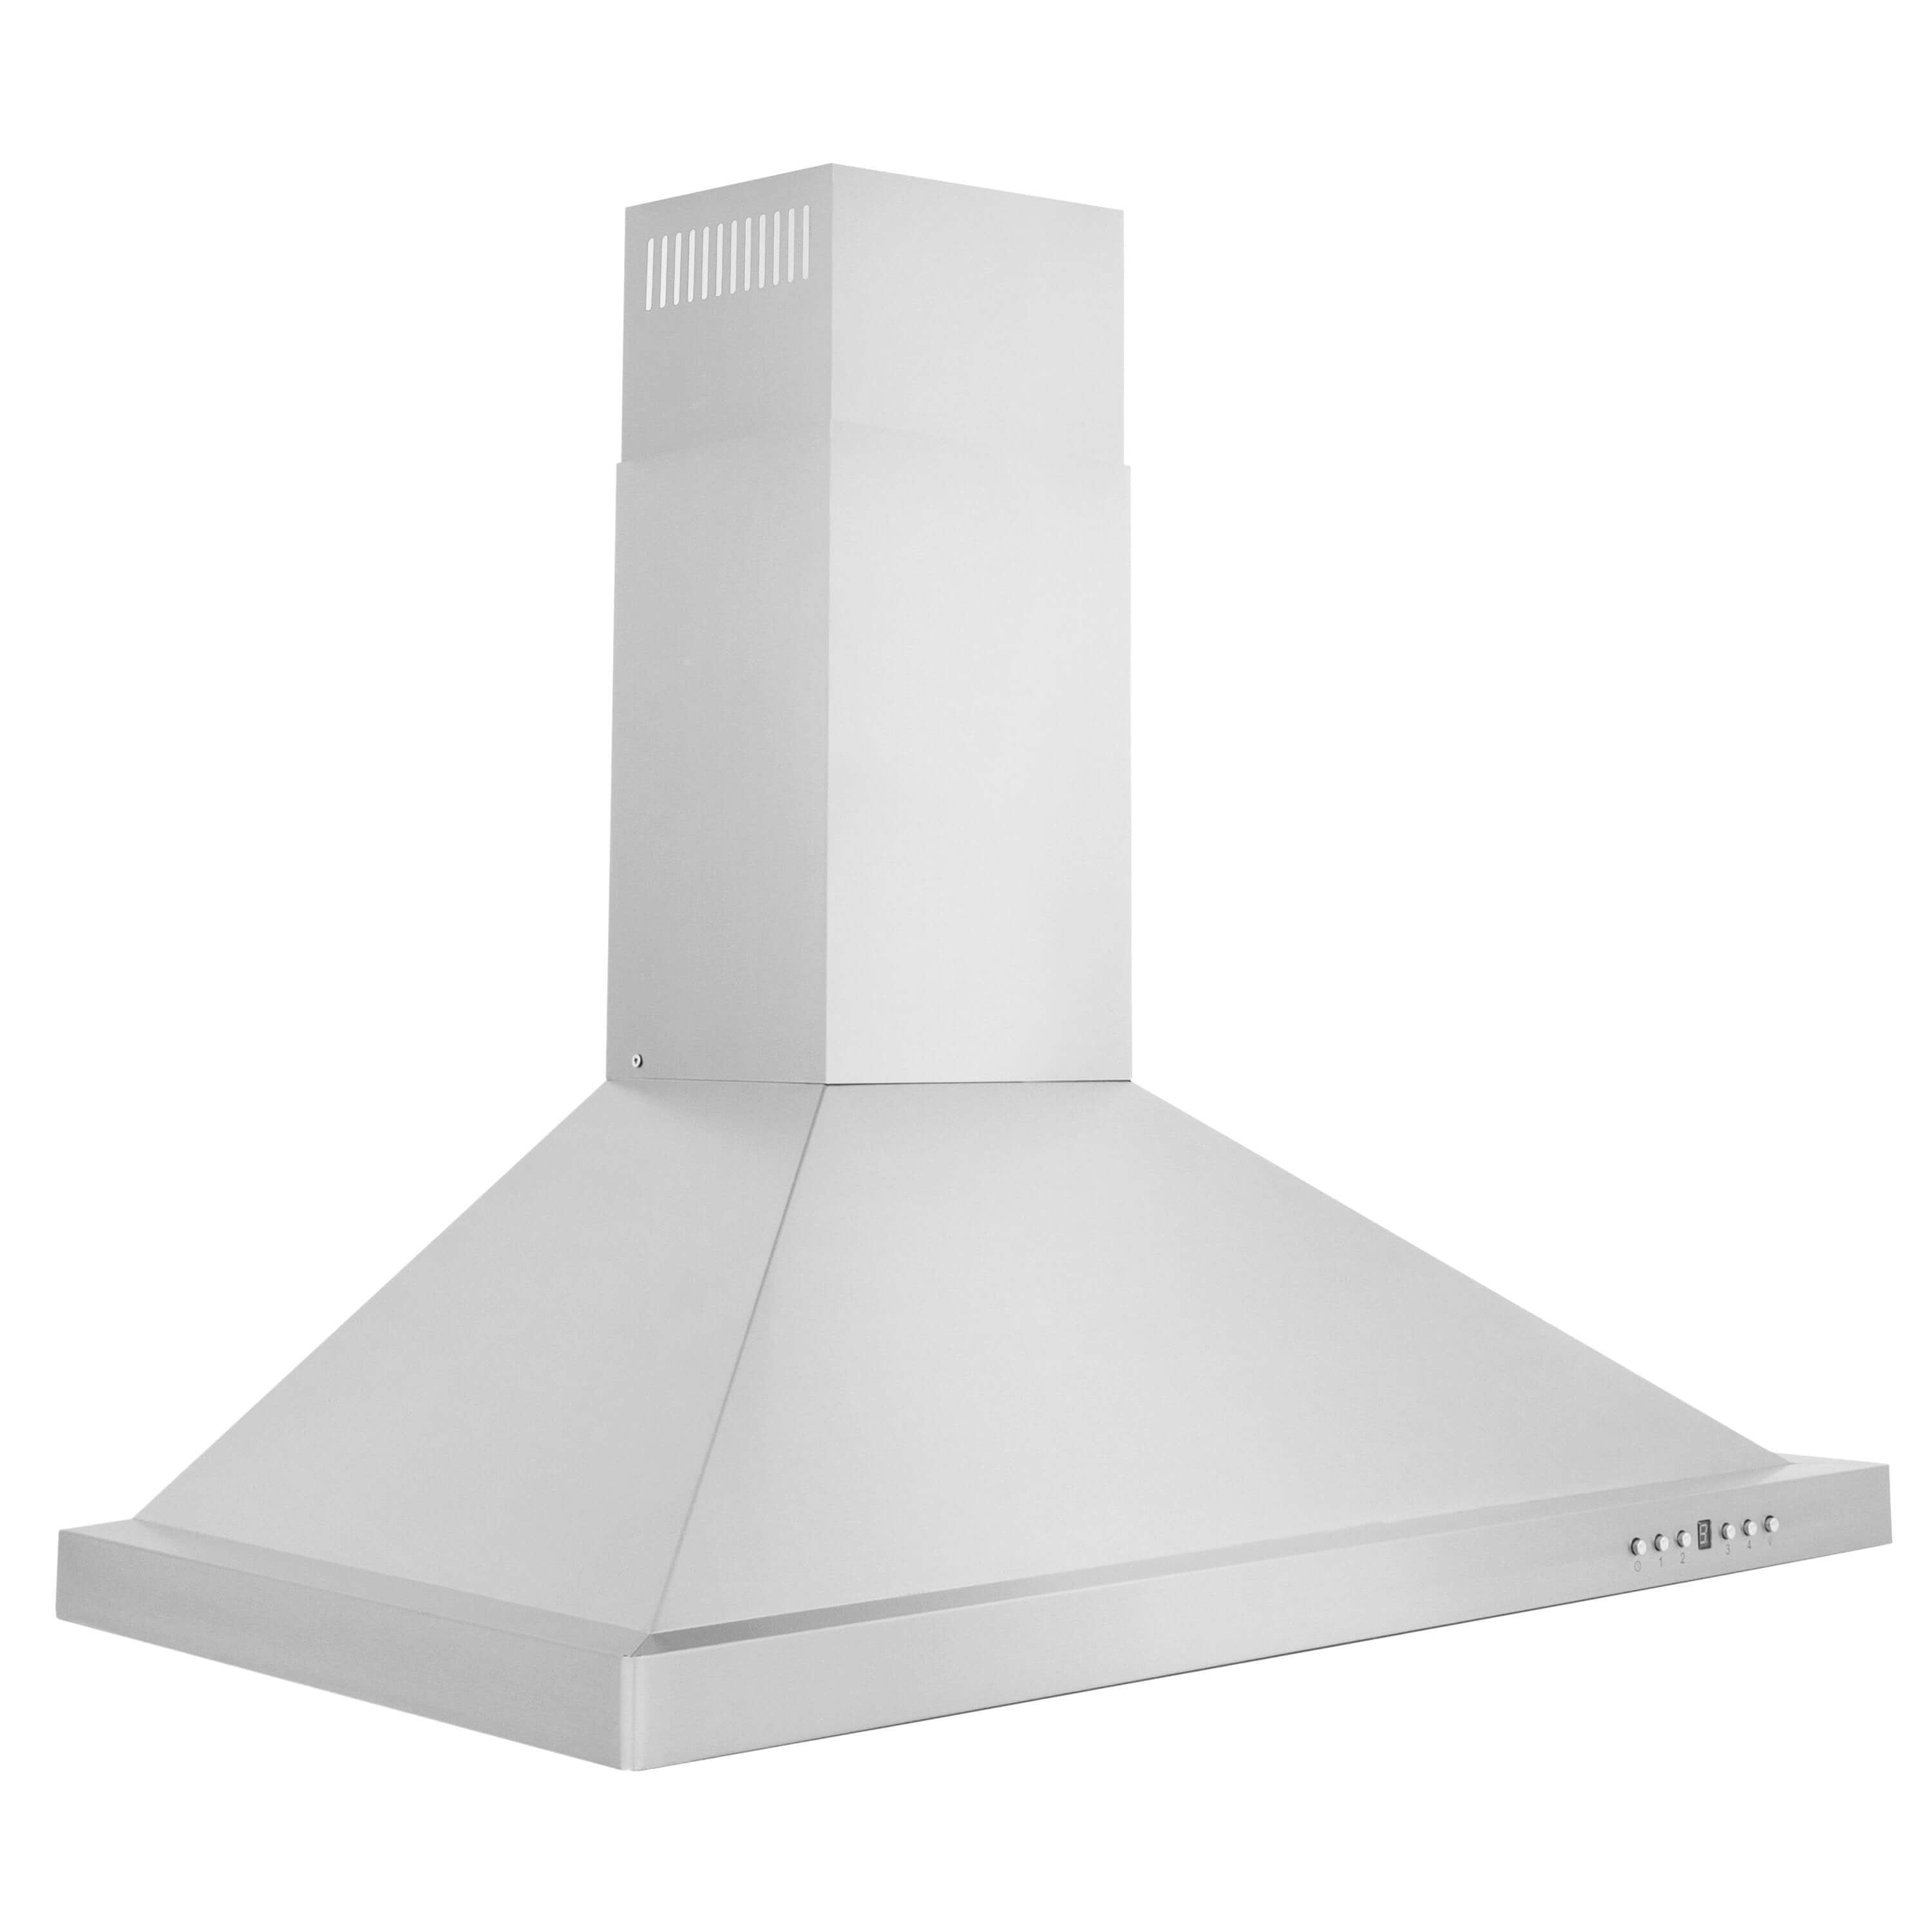 ZLINE 30 in. Recirculating Wall Mount Range Hood with Charcoal Filters in Stainless Steel (KB-CF-30) side.